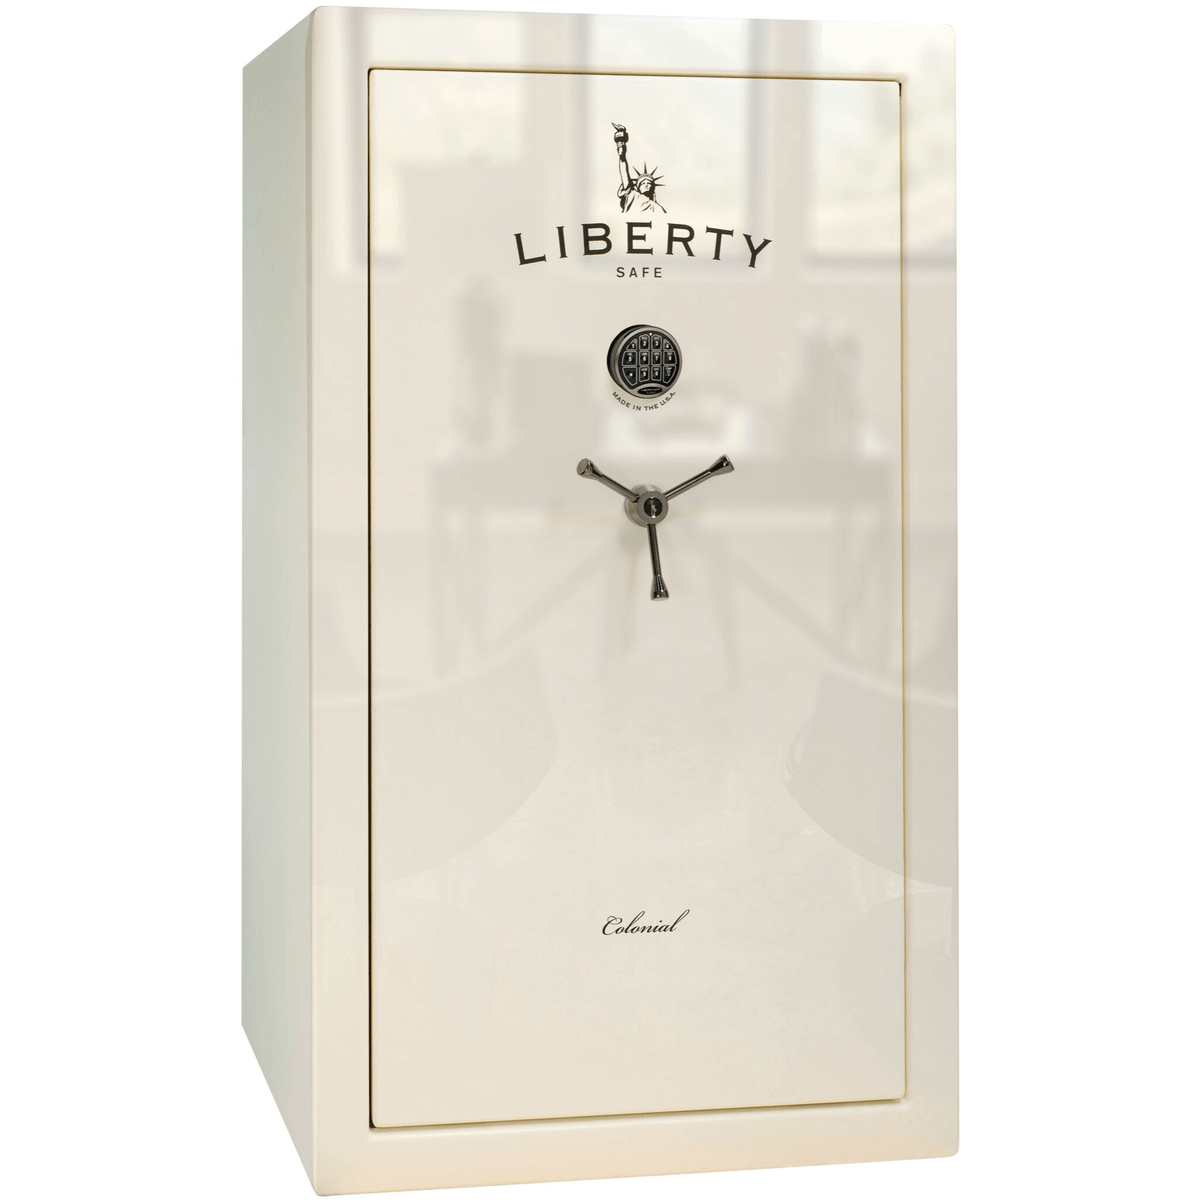 Liberty Colonial 30 Safe in White Gloss with Black Chrome Electronic Lock.